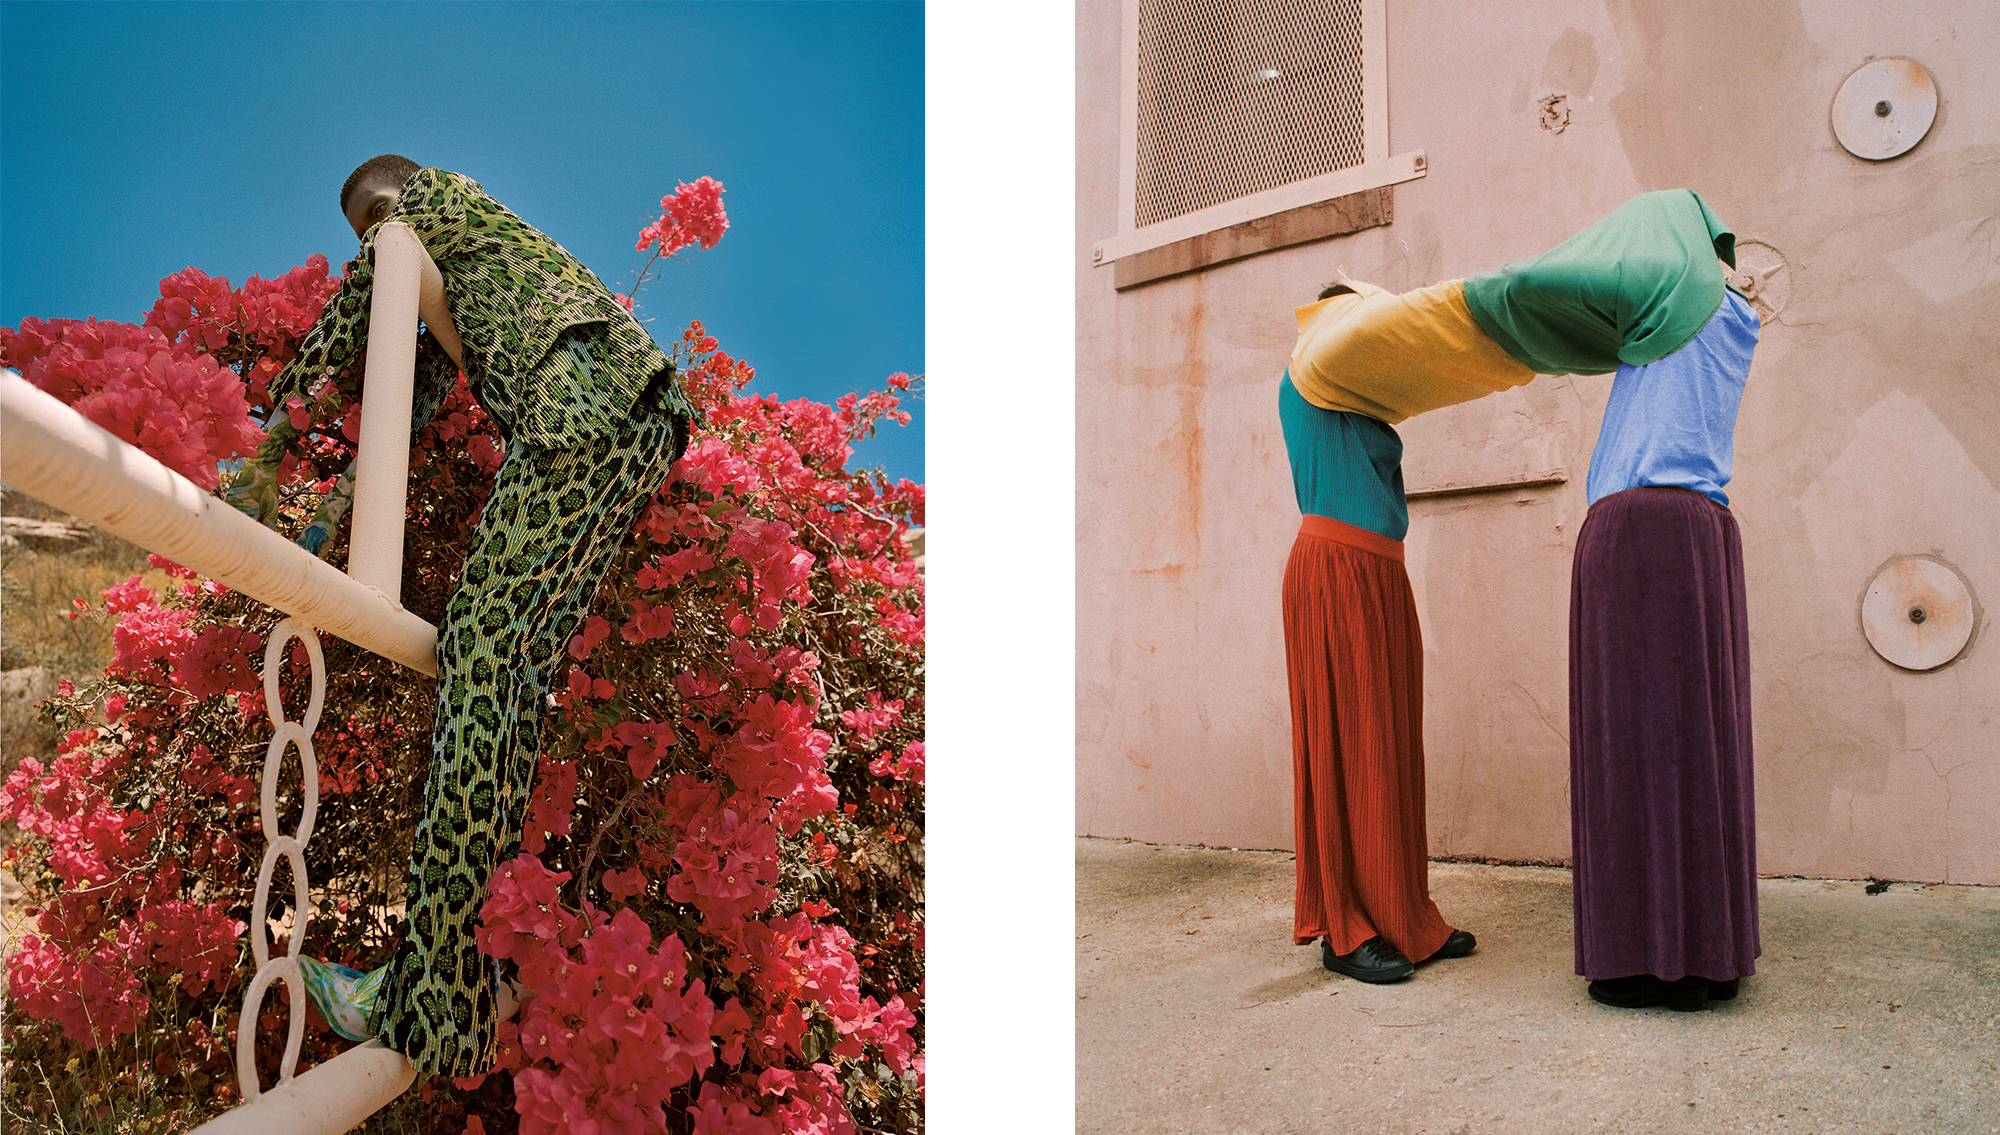 Left: Nadine Ijewere, Untitled, 2018, from The New Black Vanguard (Aperture, 2019). Right: Arielle Bobb-Willis, New Orleans, 2017; from The New Black Vanguard (Aperture 2019).